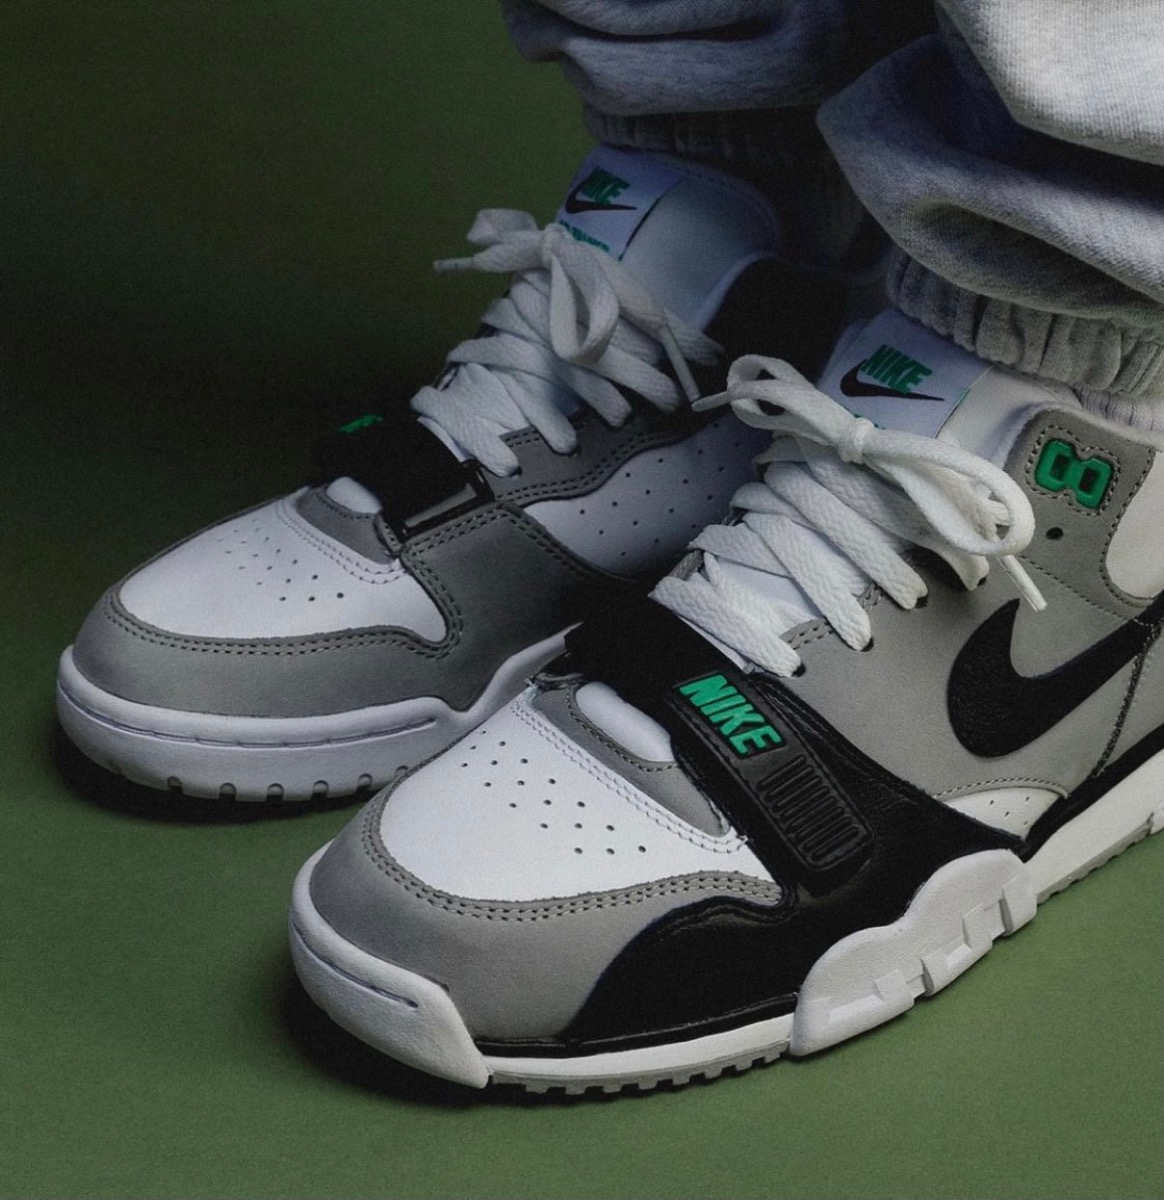 Nike Air Trainer 1 “Chlorophyll”が国内5月13日に復刻発売予定 | UP TO DATE